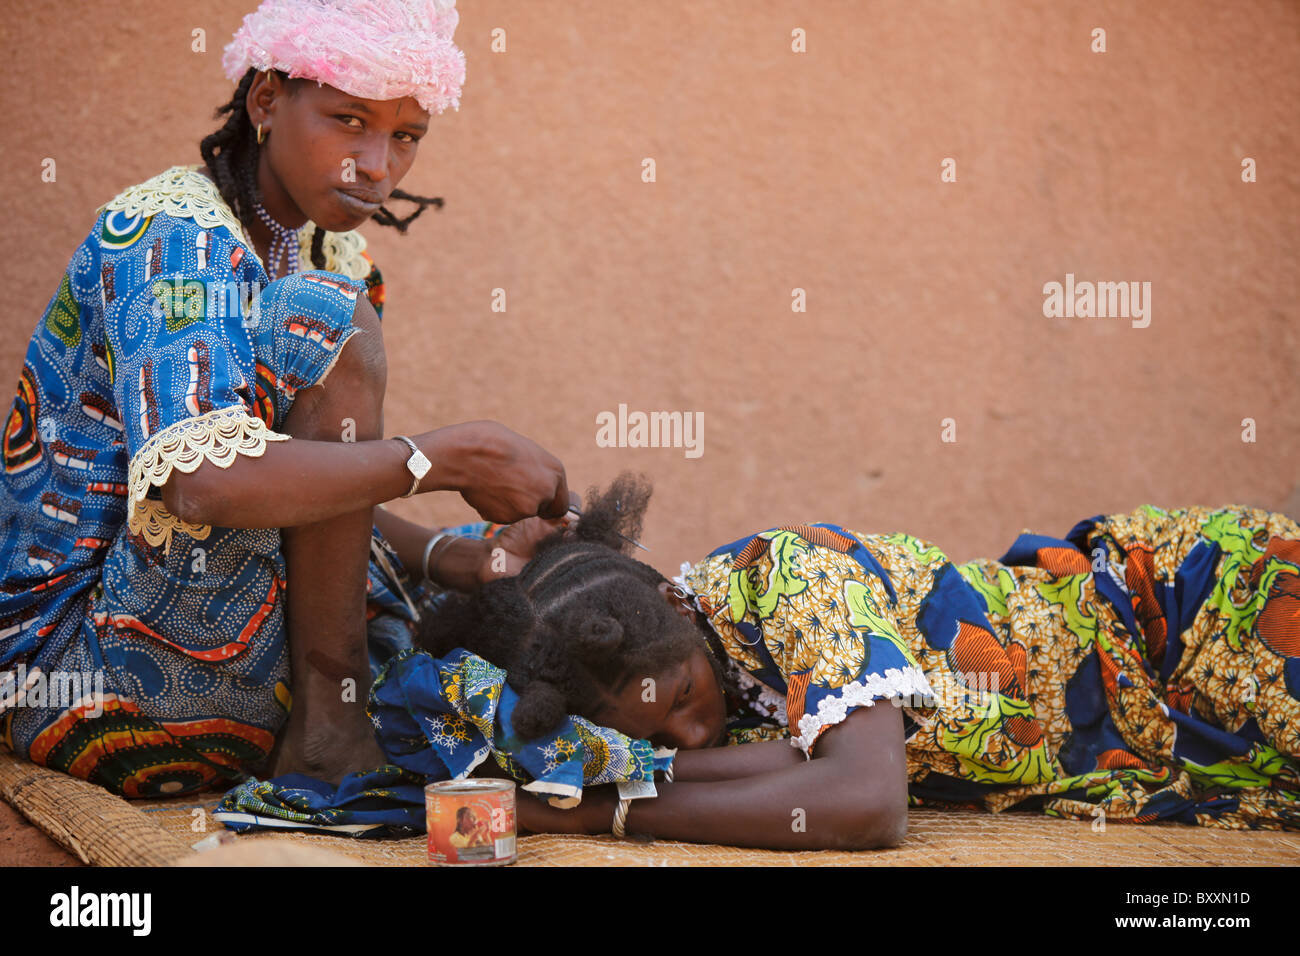 In the town of Djibo in northern Burkina Faso, a young woman braids her cousin's hair in traditional Fulani style. Stock Photo